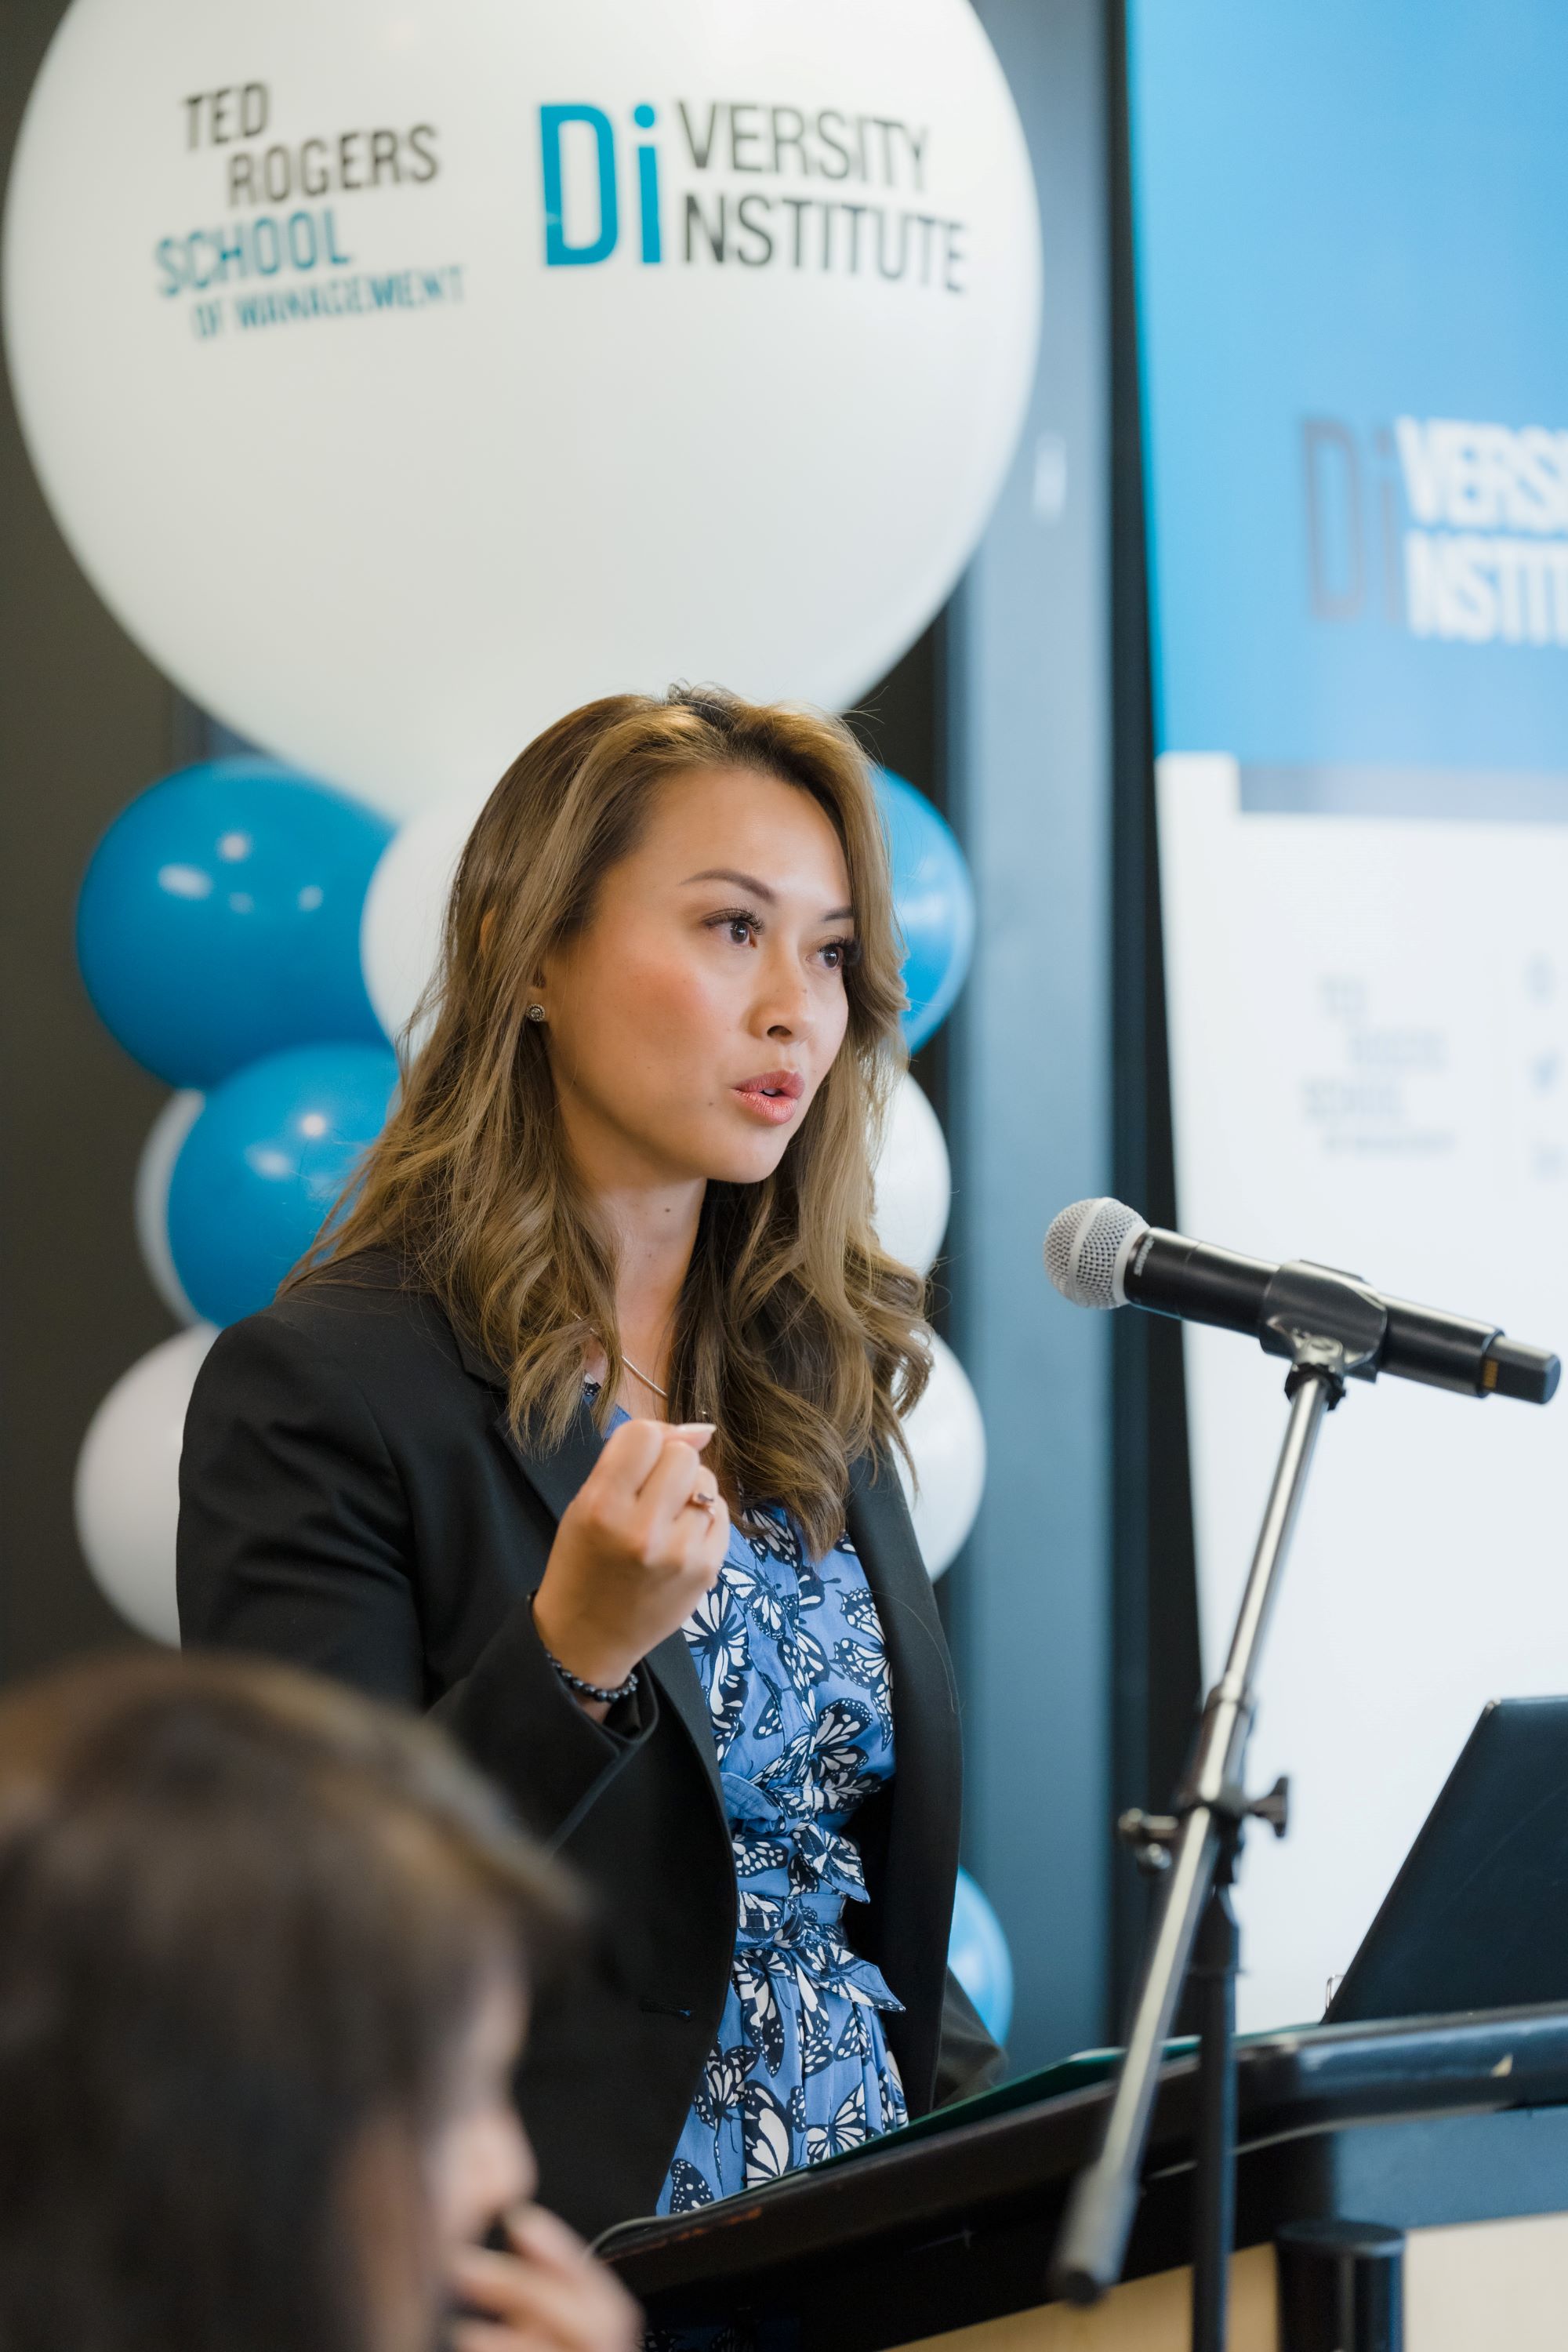 A Filipino woman wearing a blazer and blue dress, speaks into a microphone at a podium with blue and white balloons behind her.